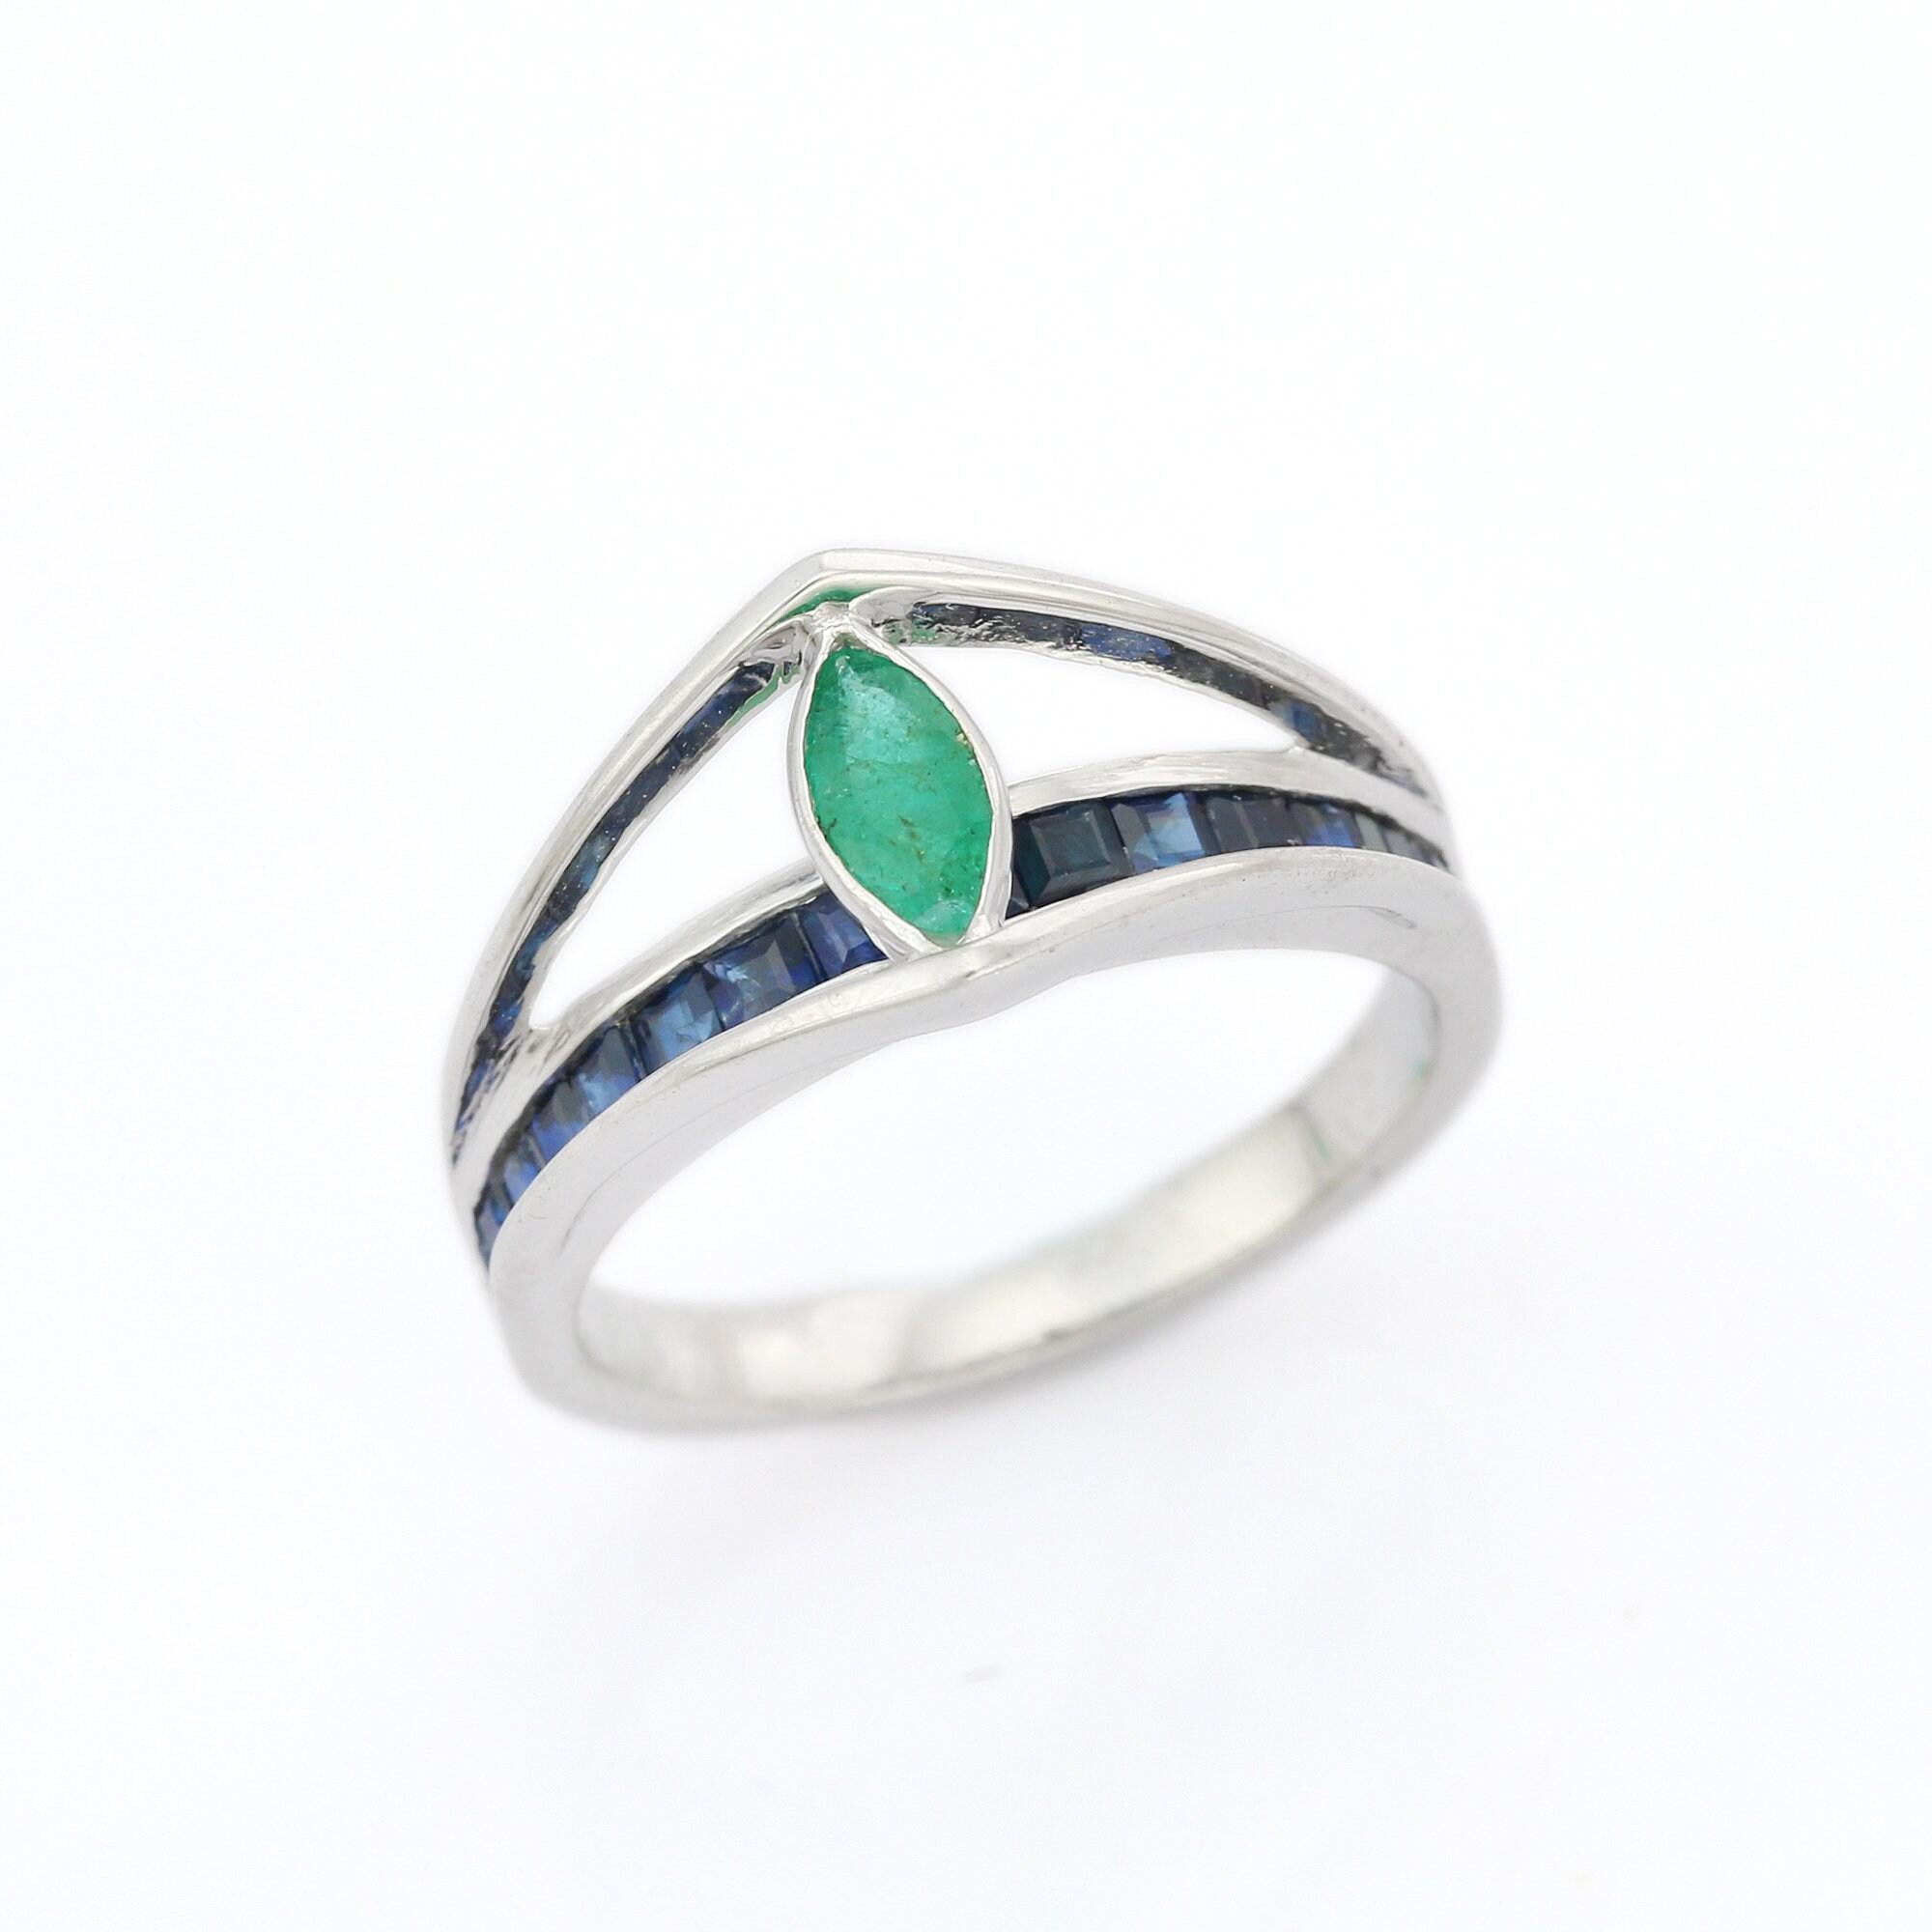 For Sale:  925 Sterling Silver Natural Emerald and Sapphire Ring, Christmas Gifts 8